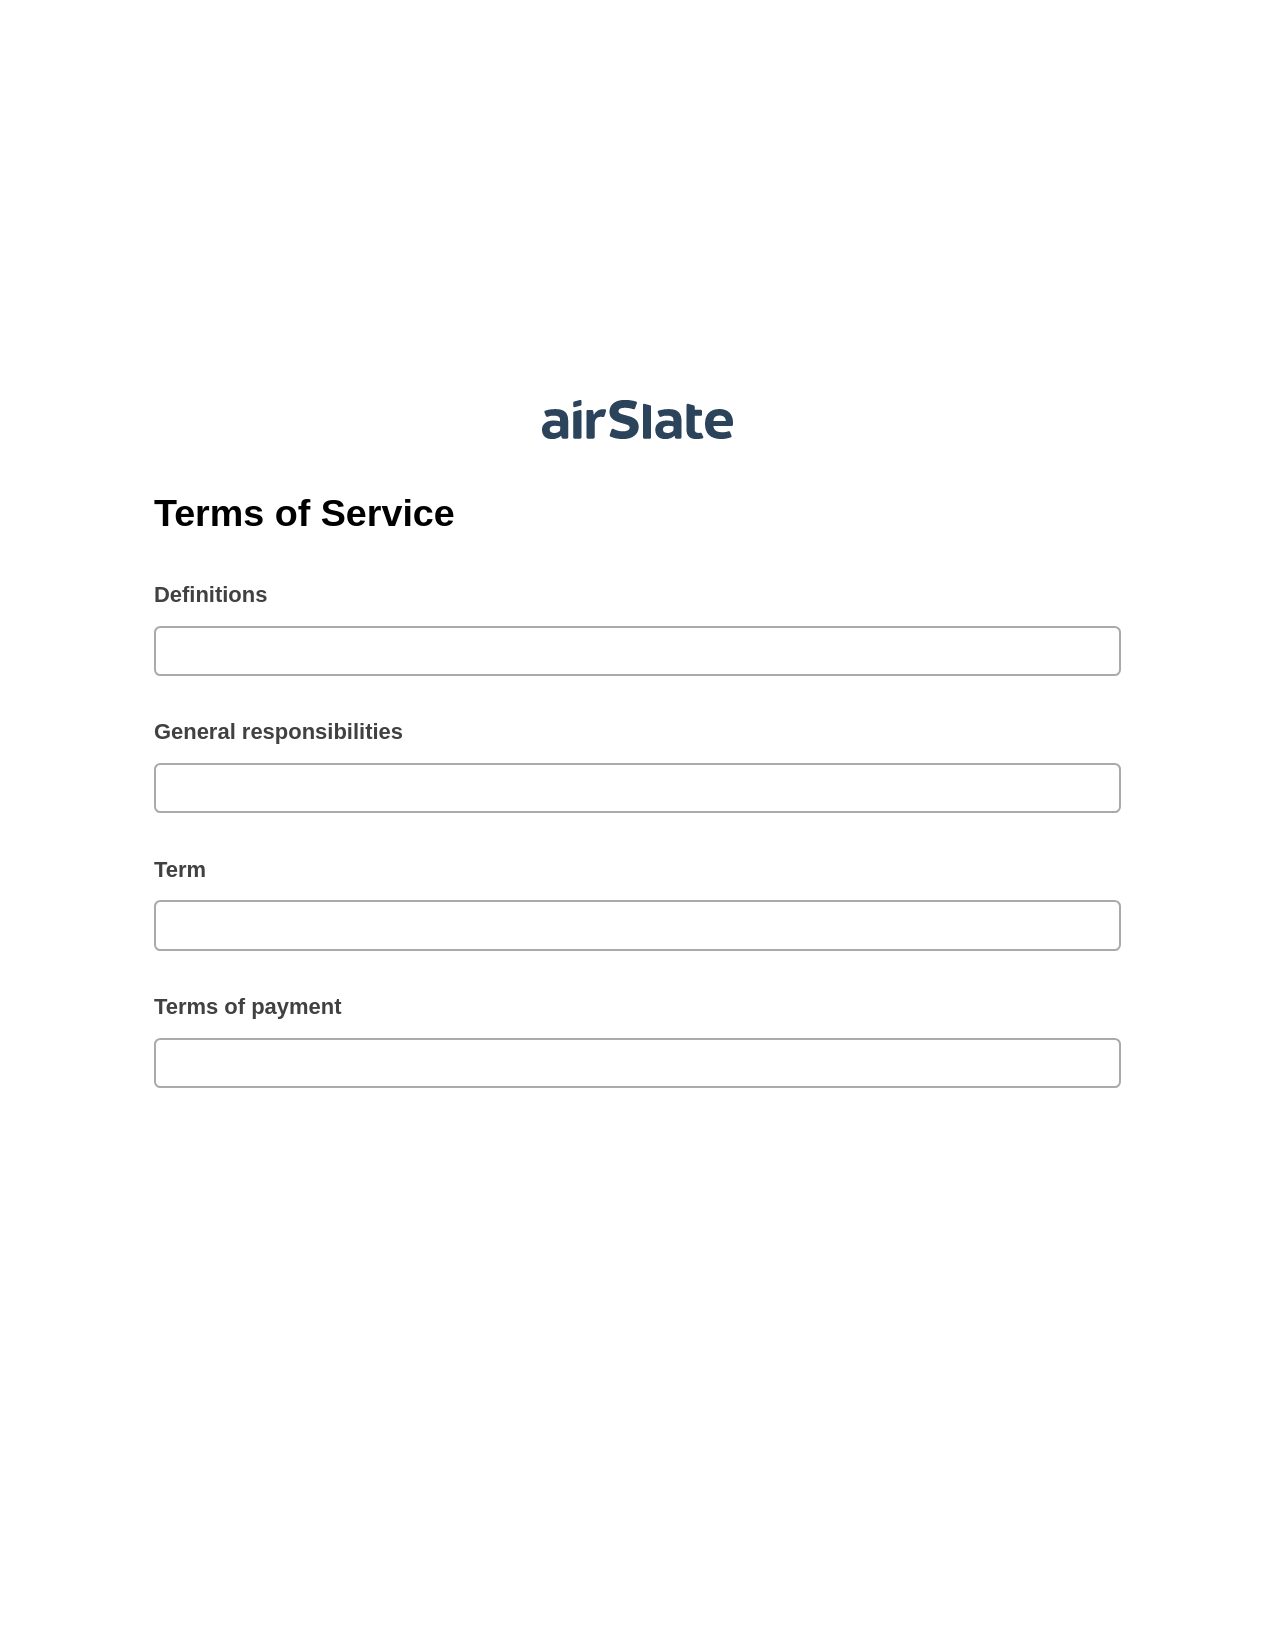 Multirole Terms of Service Pre-fill Slate from MS Dynamics 365 Records Bot, Audit Trail Bot, Box Bot